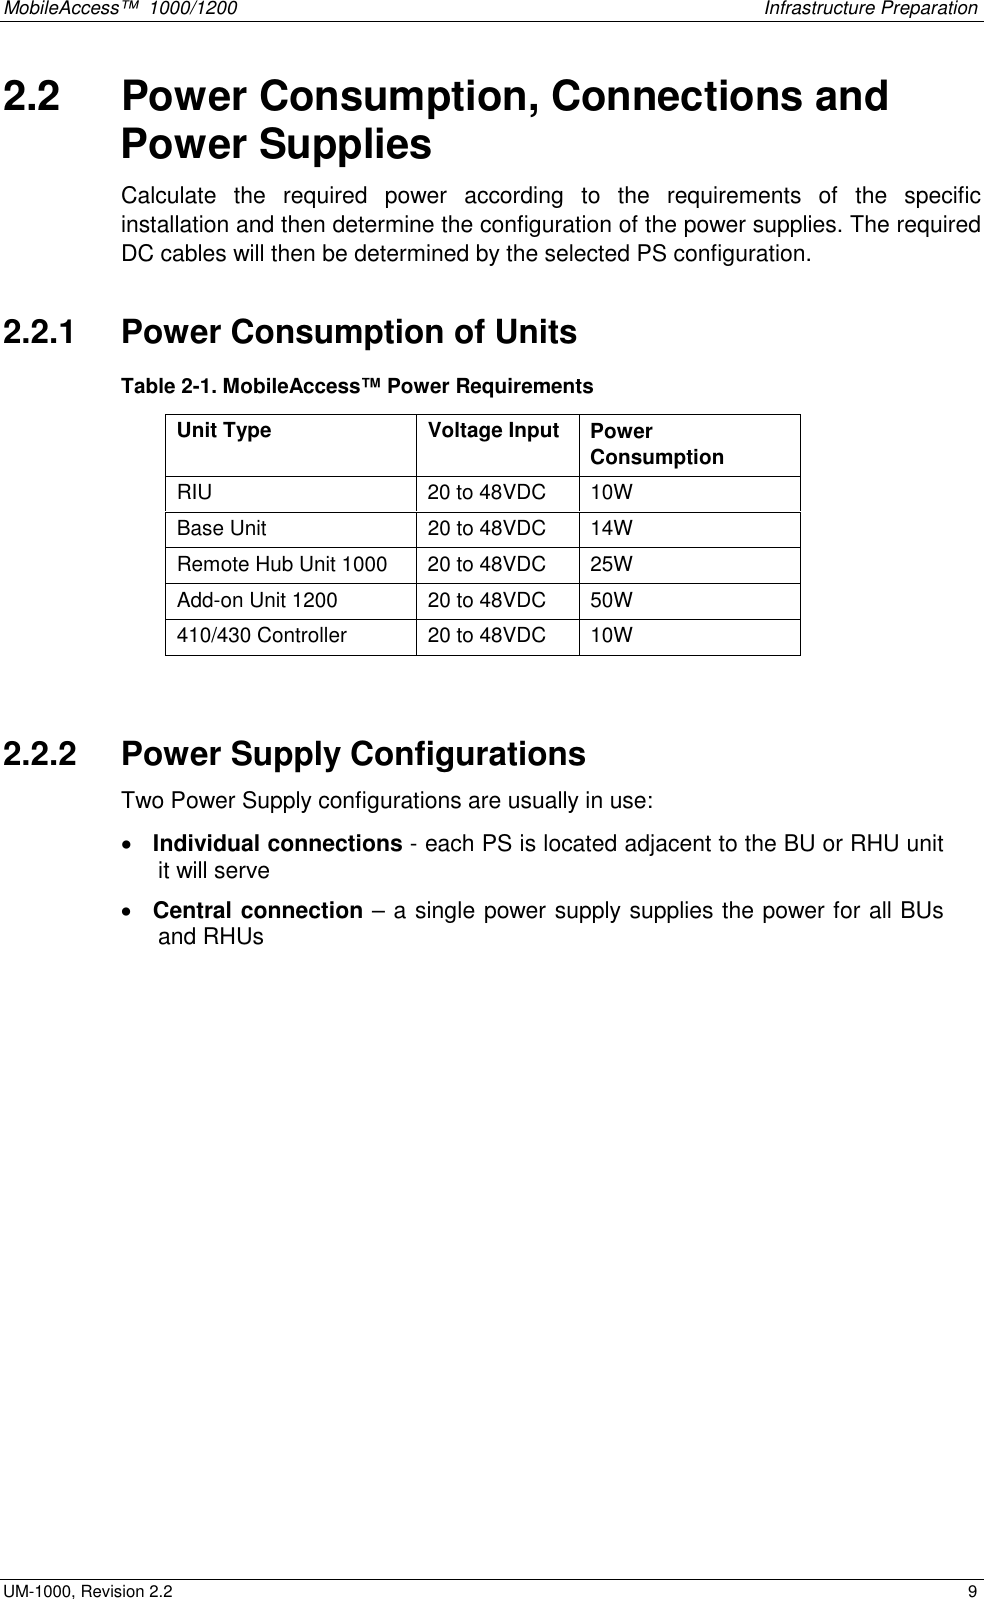 MobileAccess™  1000/1200    Infrastructure Preparation  UM-1000, Revision 2.2    9 2.2   Power Consumption, Connections and Power Supplies Calculate the required power according to the requirements of the specific installation and then determine the configuration of the power supplies. The required DC cables will then be determined by the selected PS configuration. 2.2.1   Power Consumption of Units Table  2-1. MobileAccess™ Power Requirements Unit Type  Voltage Input  Power Consumption RIU  20 to 48VDC  10W Base Unit  20 to 48VDC  14W Remote Hub Unit 1000  20 to 48VDC  25W Add-on Unit 1200  20 to 48VDC  50W 410/430 Controller  20 to 48VDC  10W  2.2.2   Power Supply Configurations Two Power Supply configurations are usually in use:  •  Individual connections - each PS is located adjacent to the BU or RHU unit it will serve  •  Central connection – a single power supply supplies the power for all BUs and RHUs  